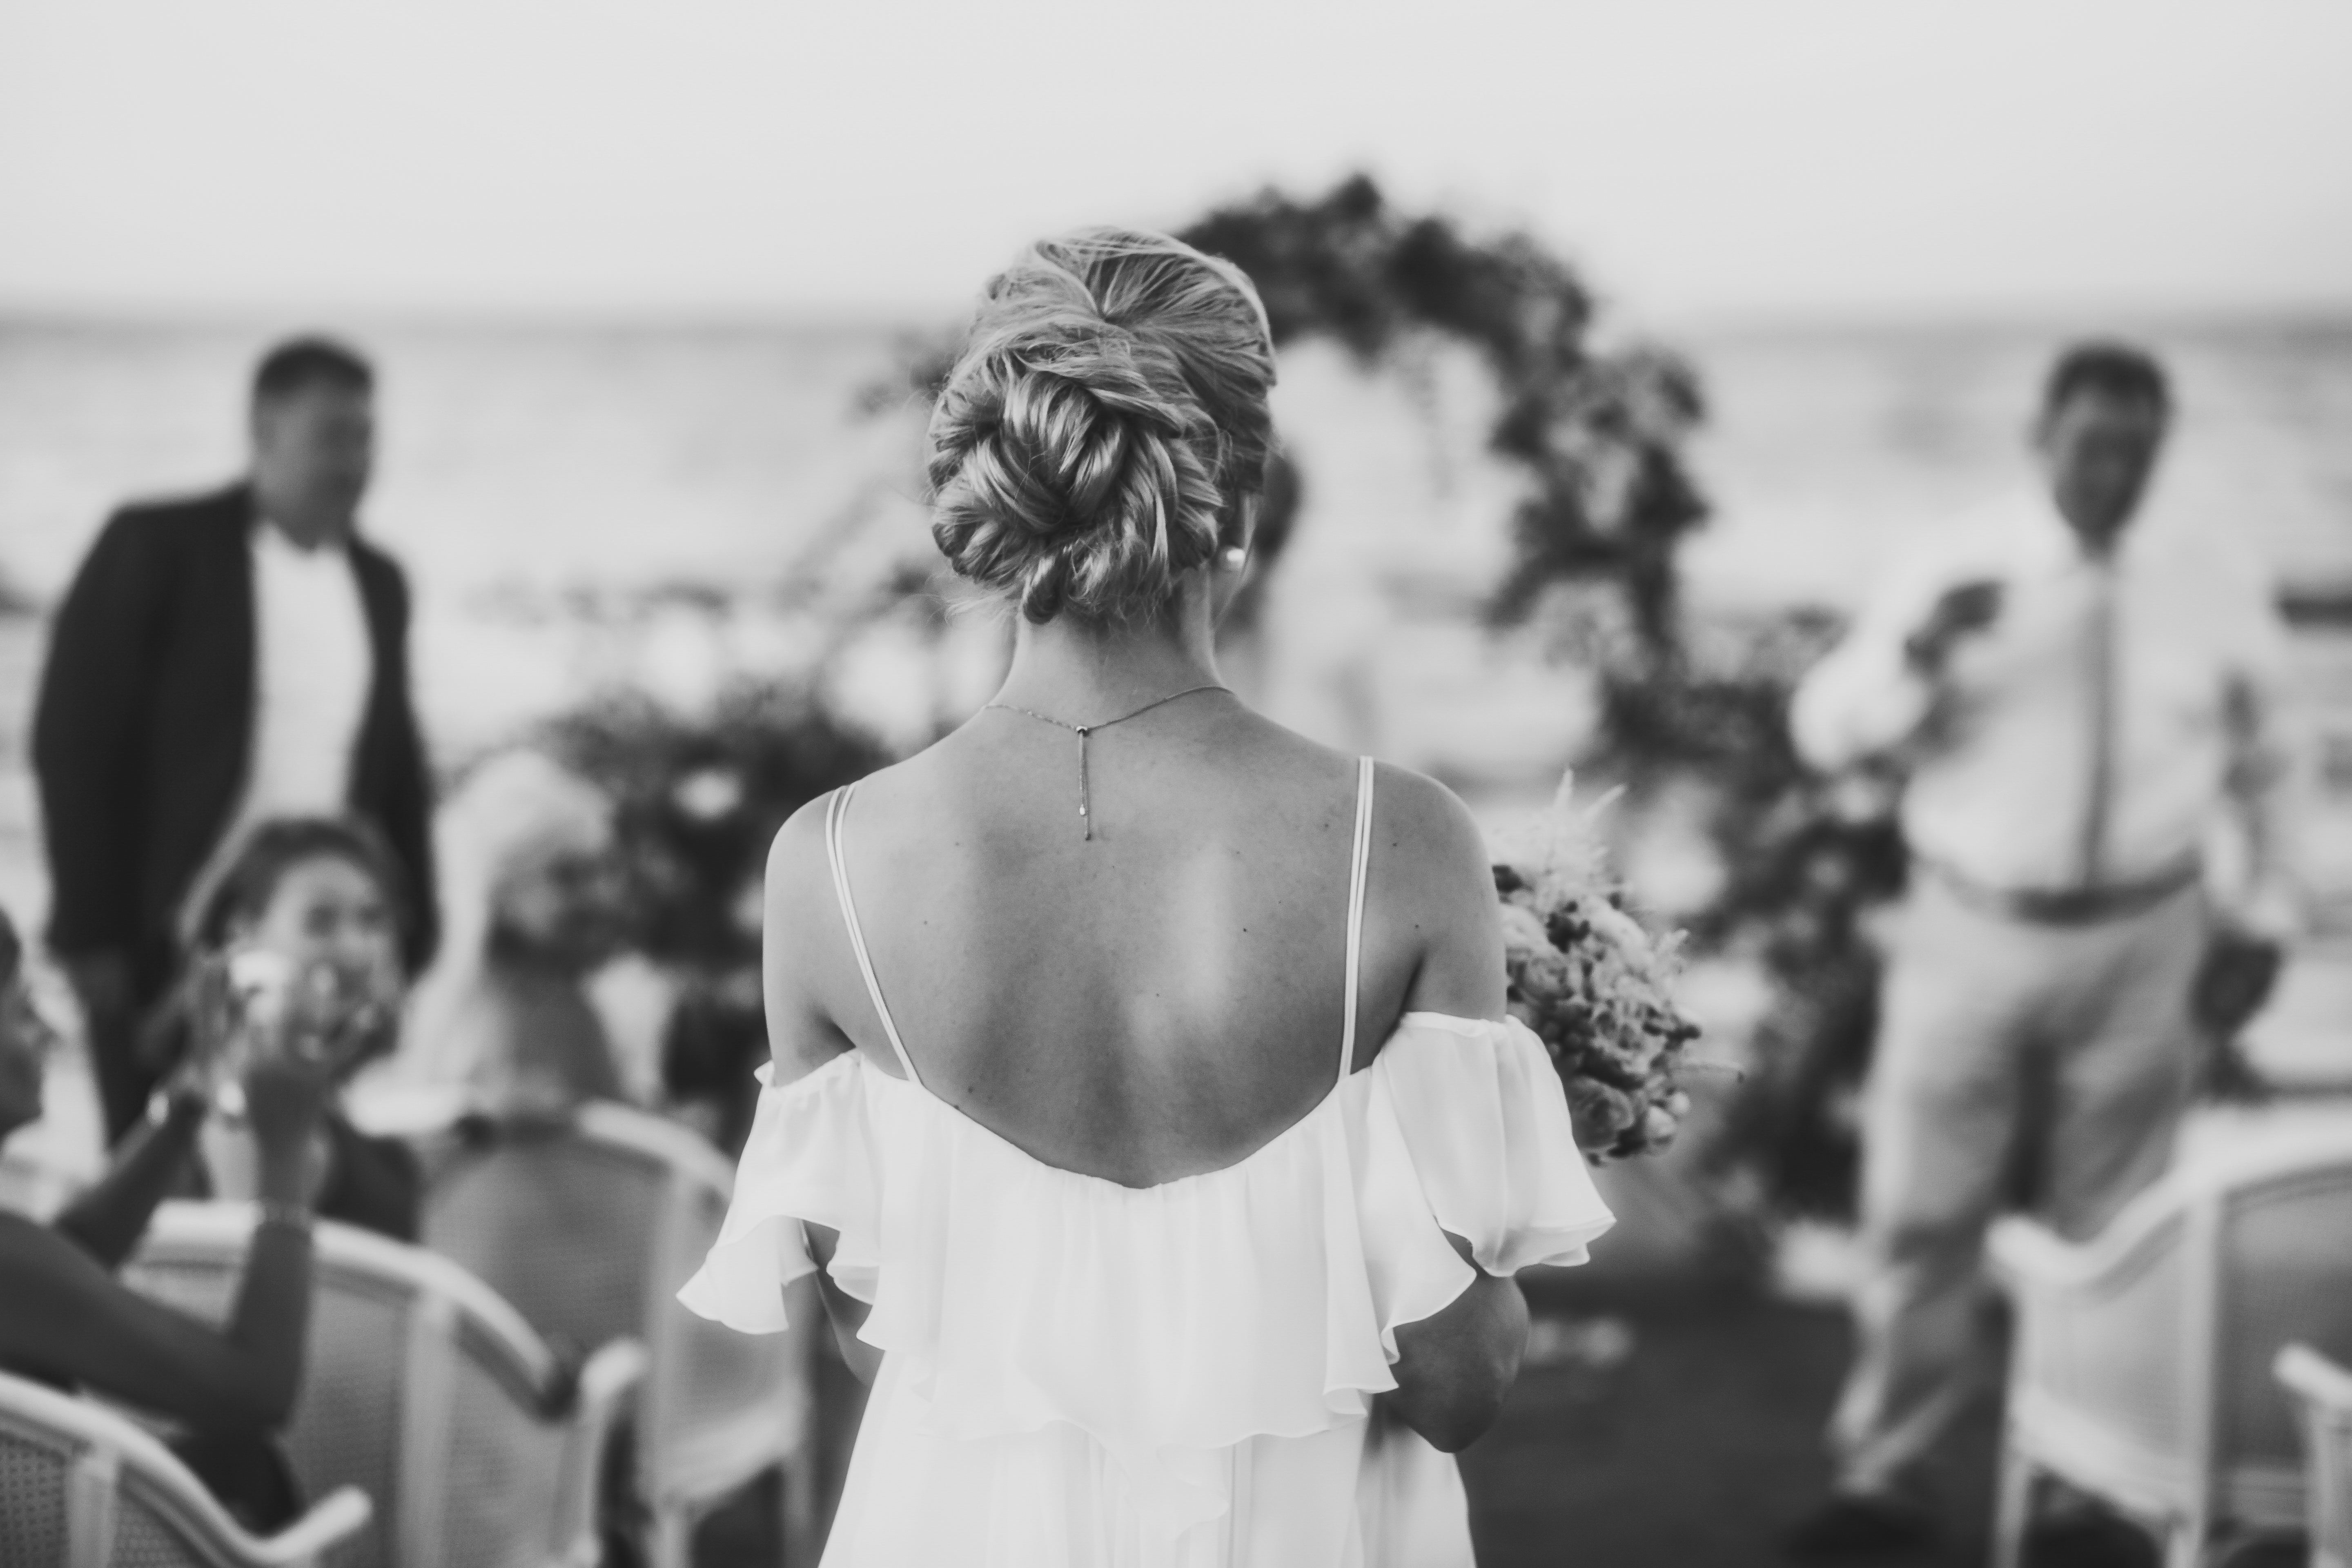 Back view of a bride walking to the altar | Source: Shutterstock